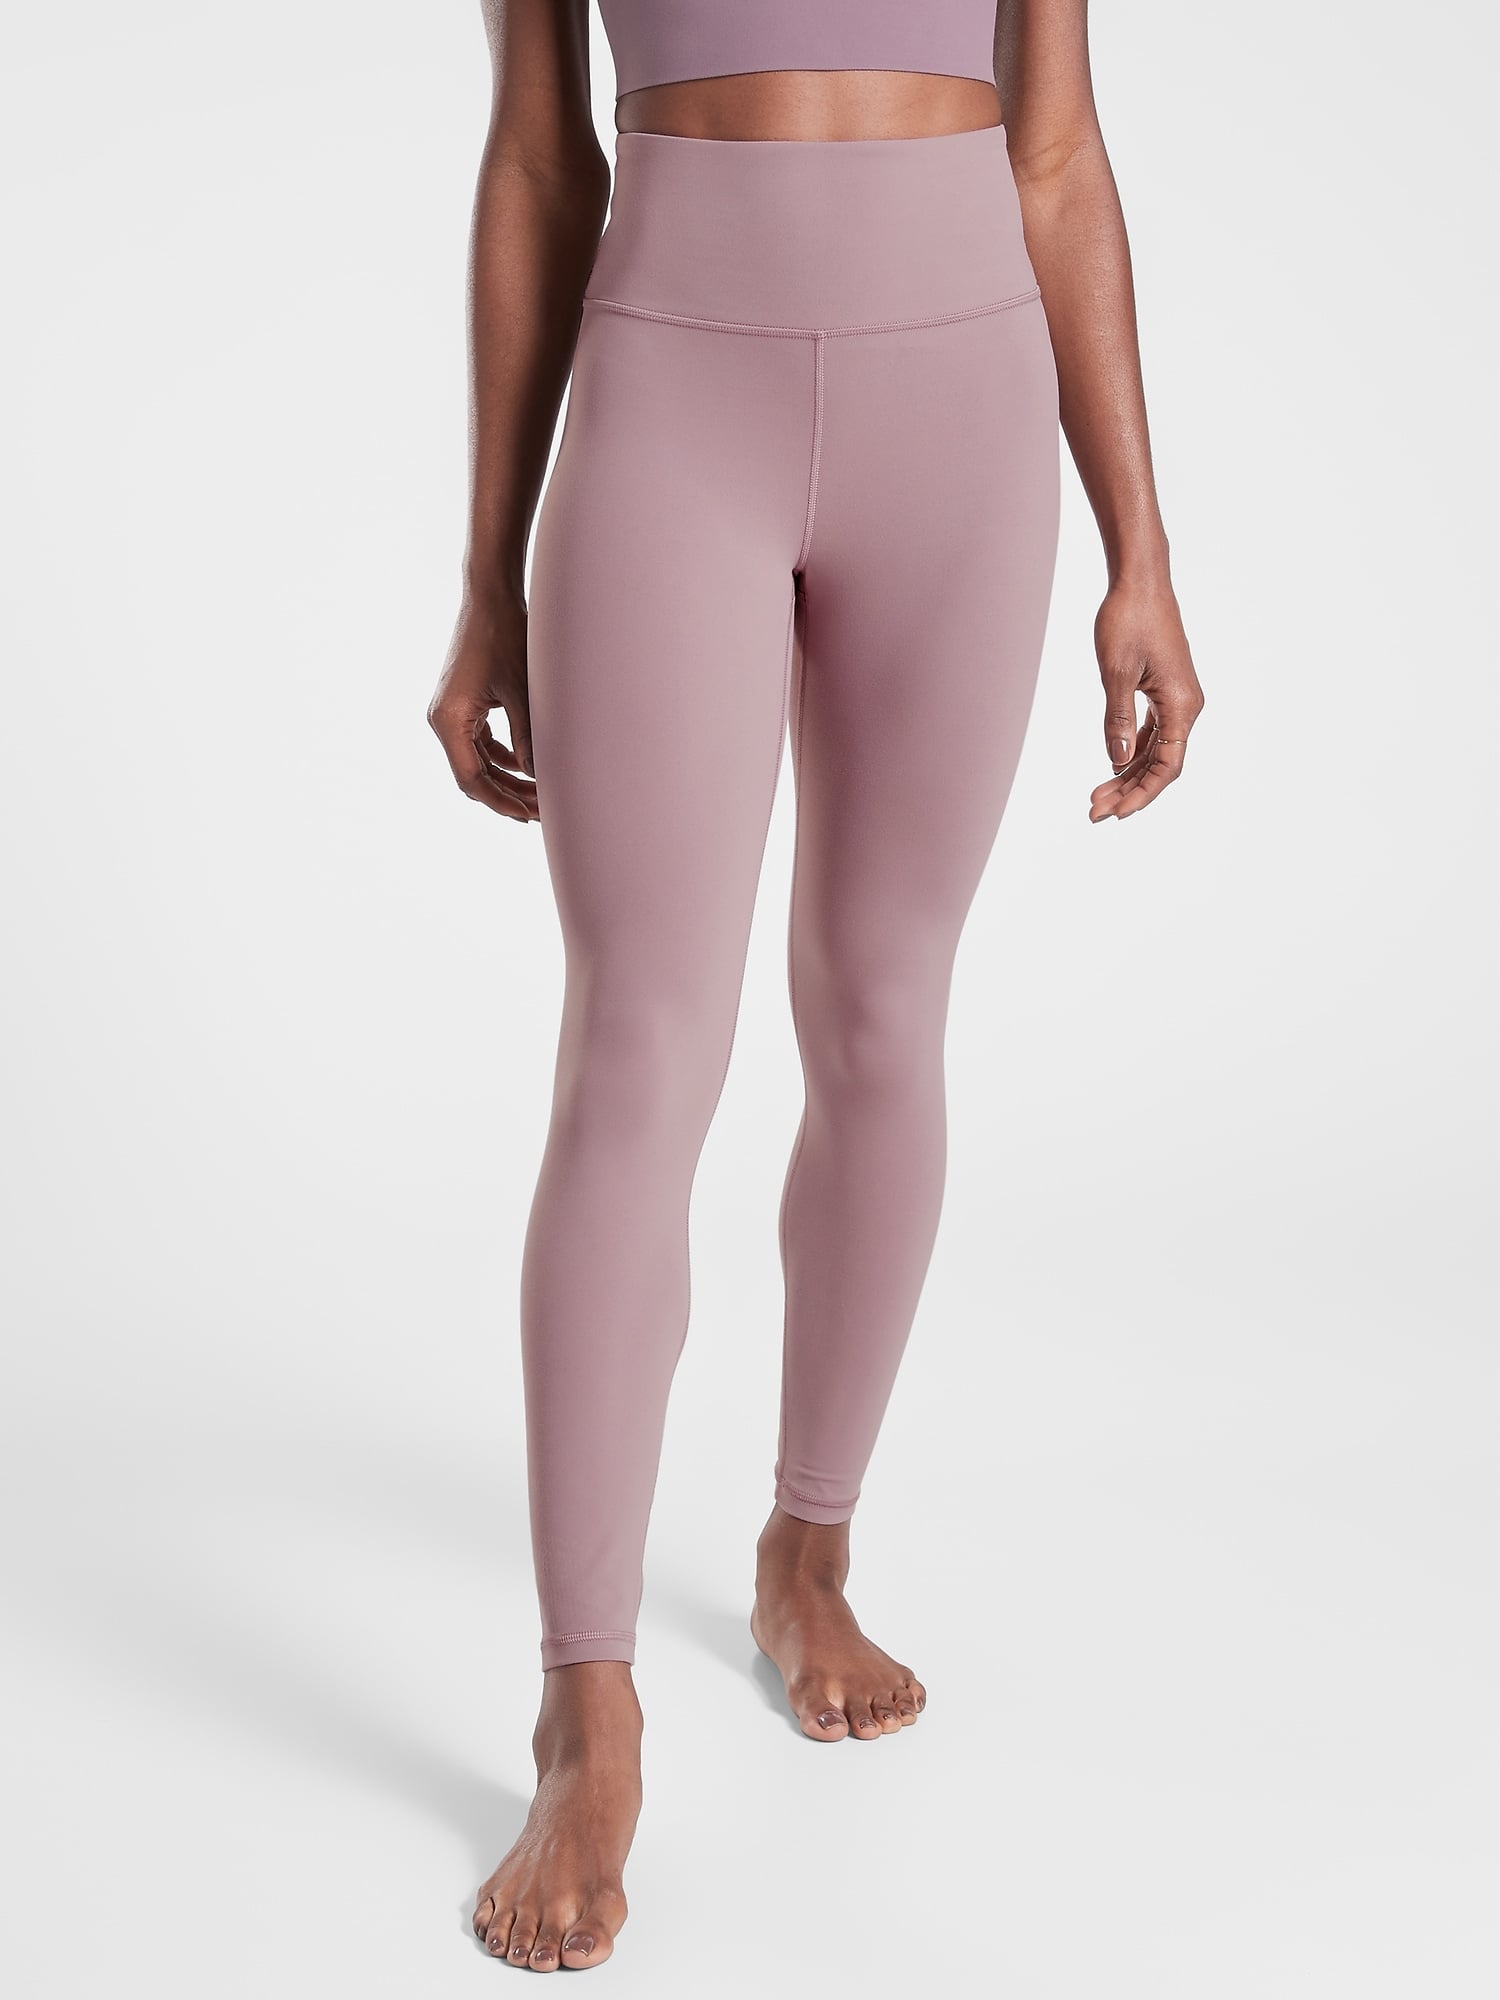 Athleta Ultra High Rise Elation 7/8 Tight, Gym Class Hero! This Brand Has  the Best Mother-Daughter Fitness Sets